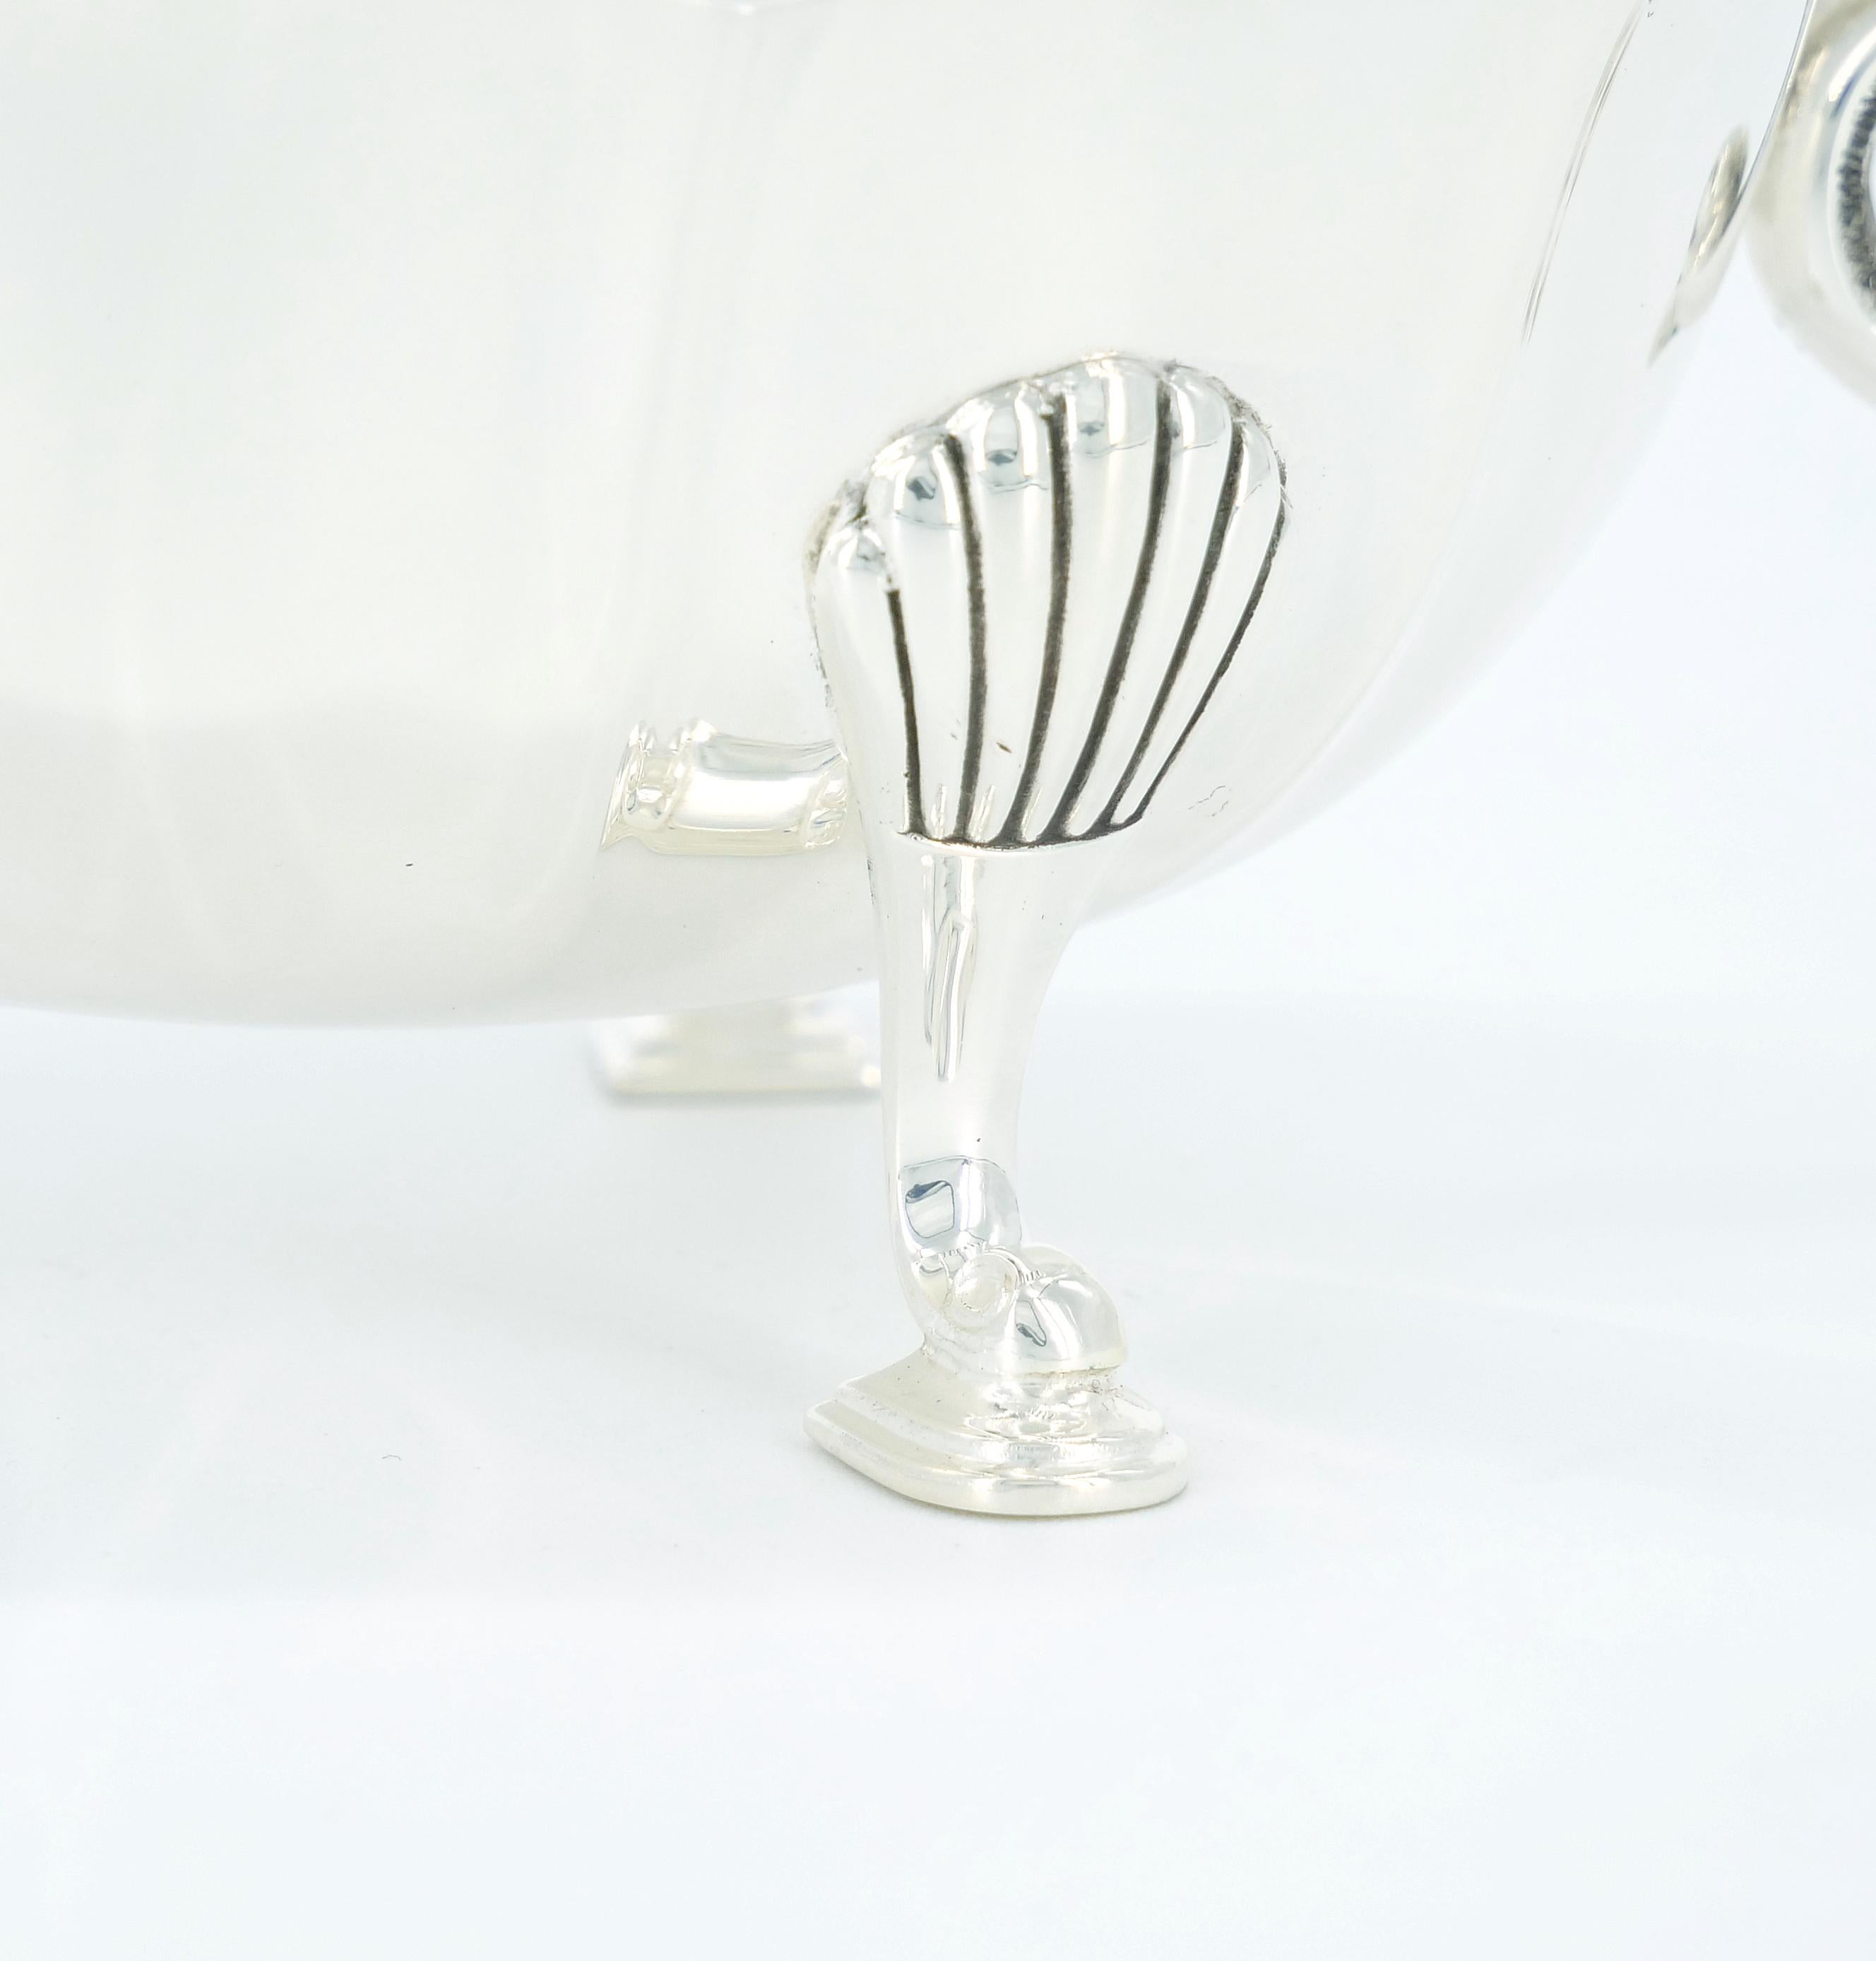 Italian Silver Plated Tableware Footed Serving Piece For Sale 1